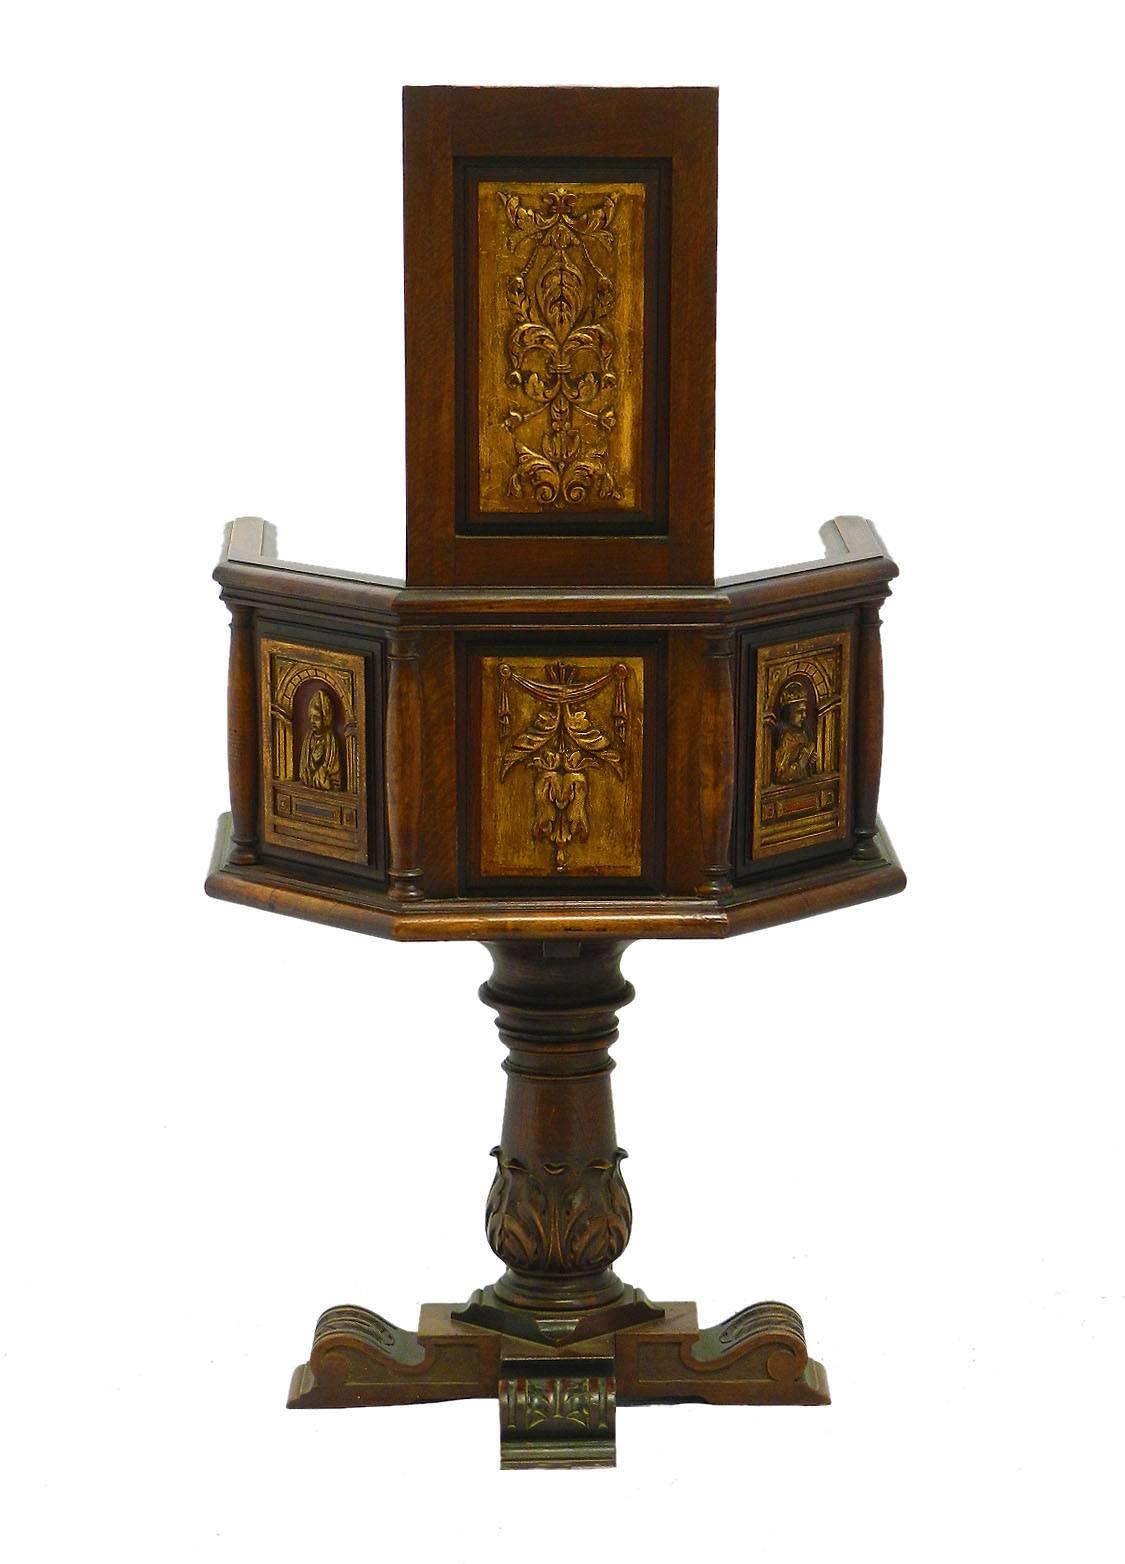 Arts and crafts French Caquetoire armchair Gothic revival.
Unusual revolving desk chair.
Carved oak with polychrome gilding.
Highly decorative ecclesiastic church chair.
Superb accent or side chair.
A rare find from the private chapel of a small